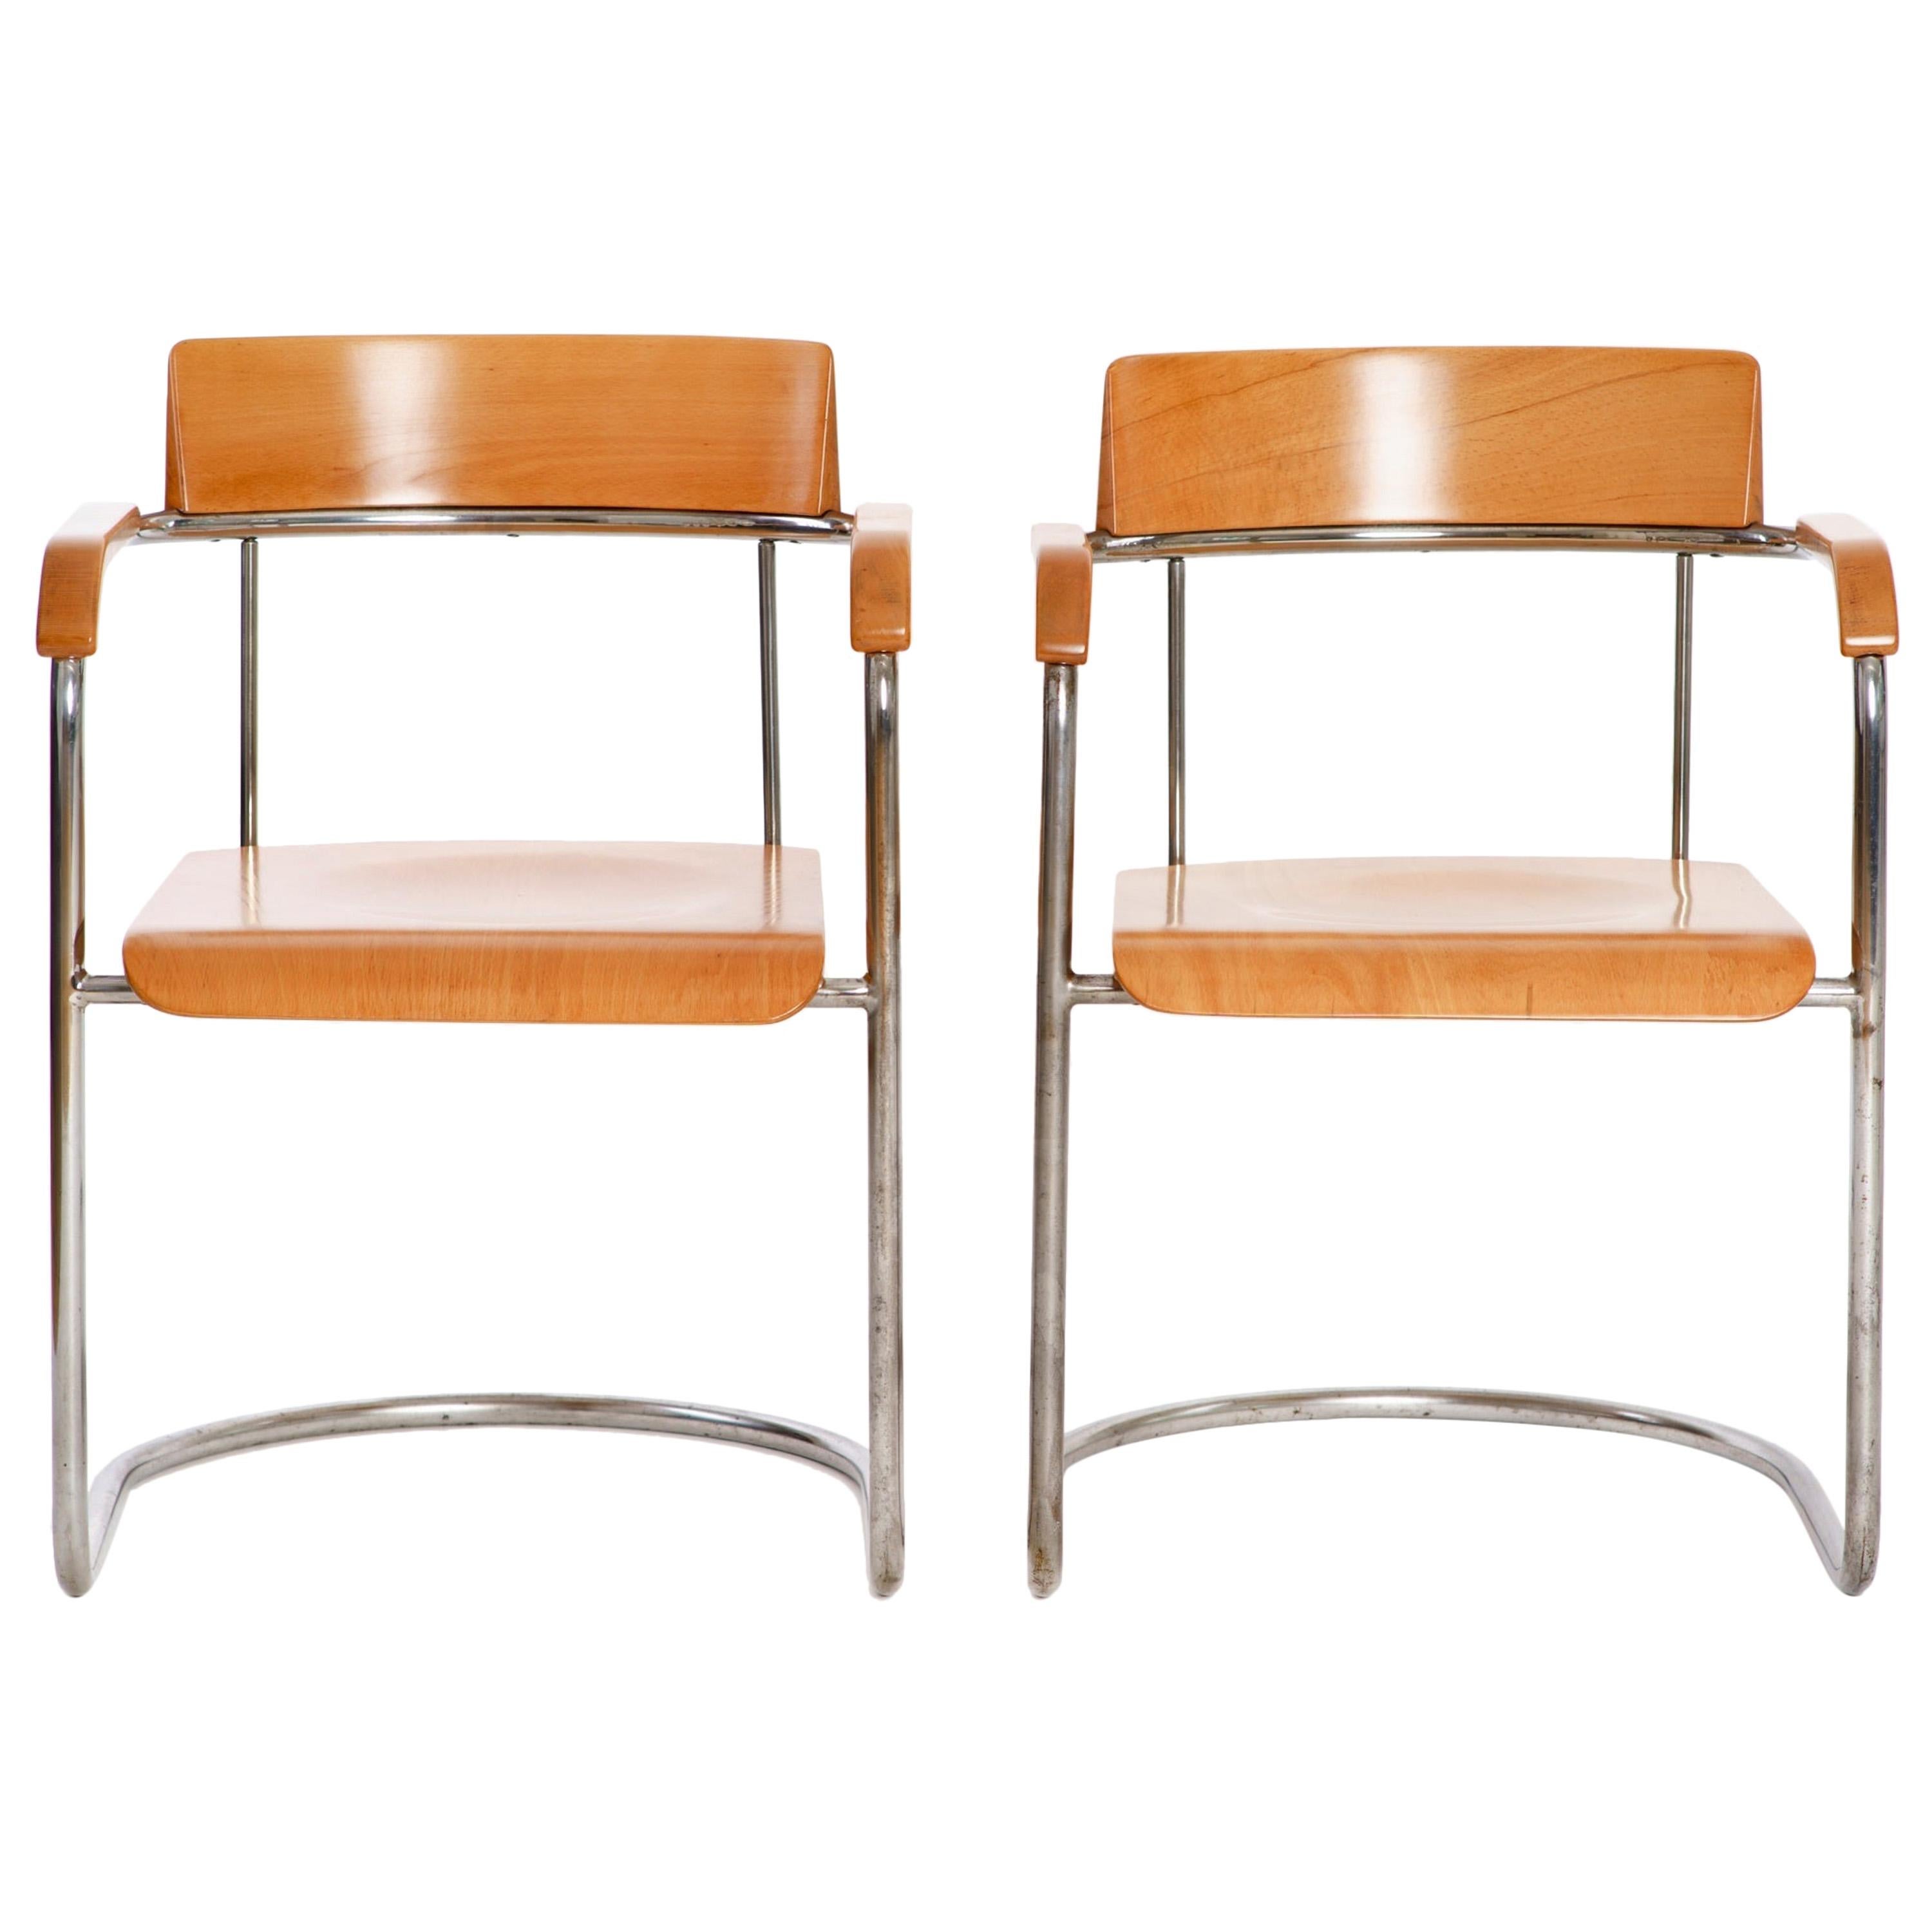 Tubular Steel Chairs from Fa. Vichr, 1930s, Set of Two